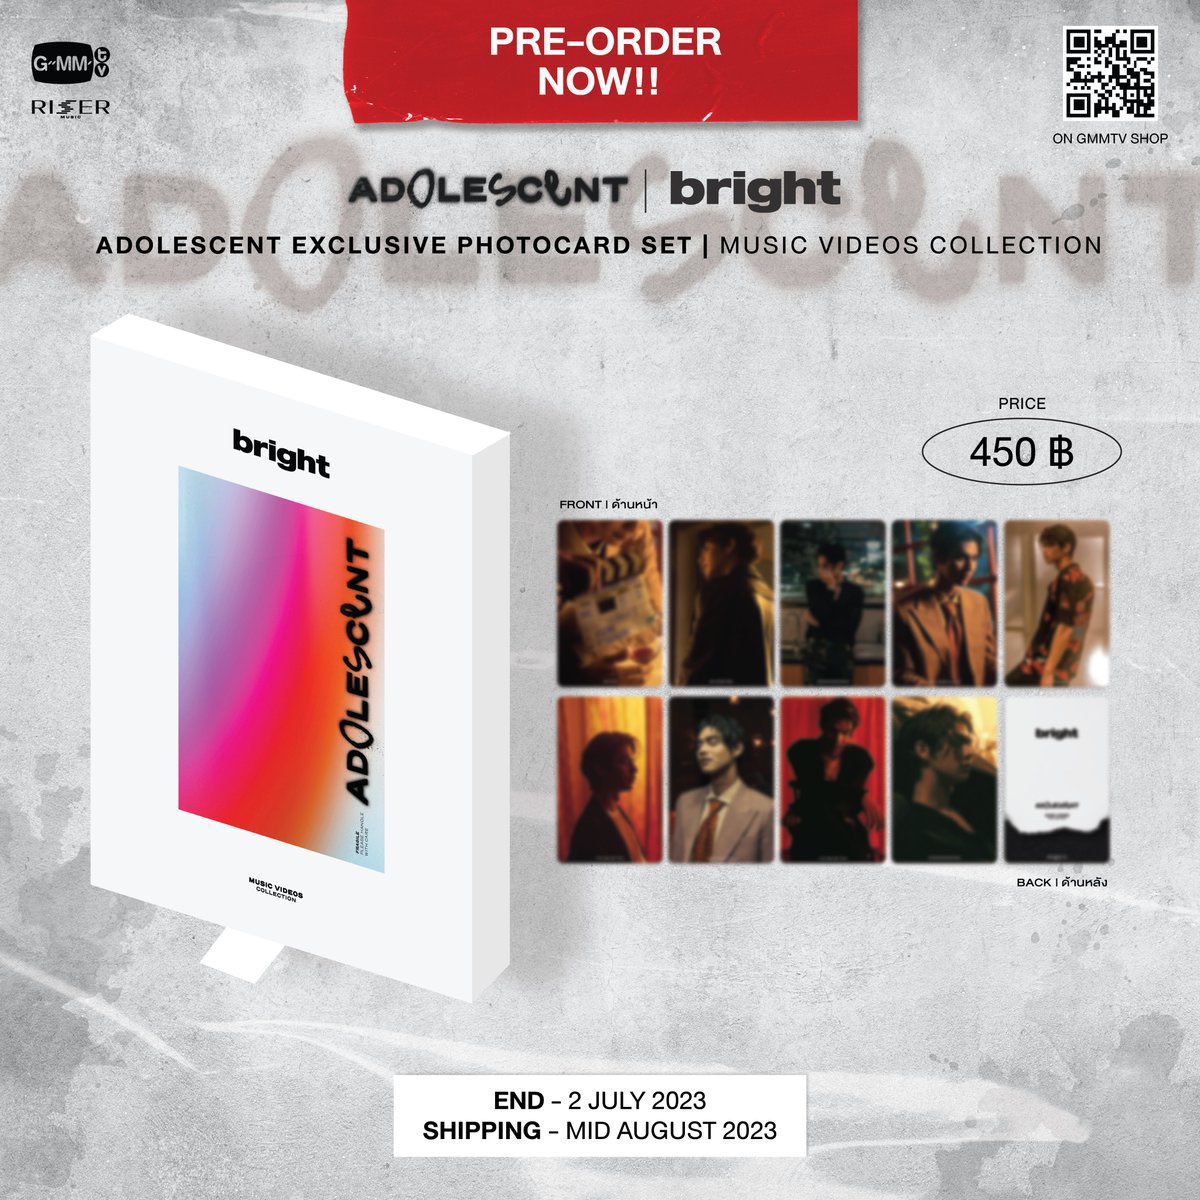 Boxset is one thing but if anything you should single out to sell is the mini album aka bright’s first EP not the photo card 

you call yourself a music label? I would say you have zero respect for music 😭😭😭 @RiserMusic